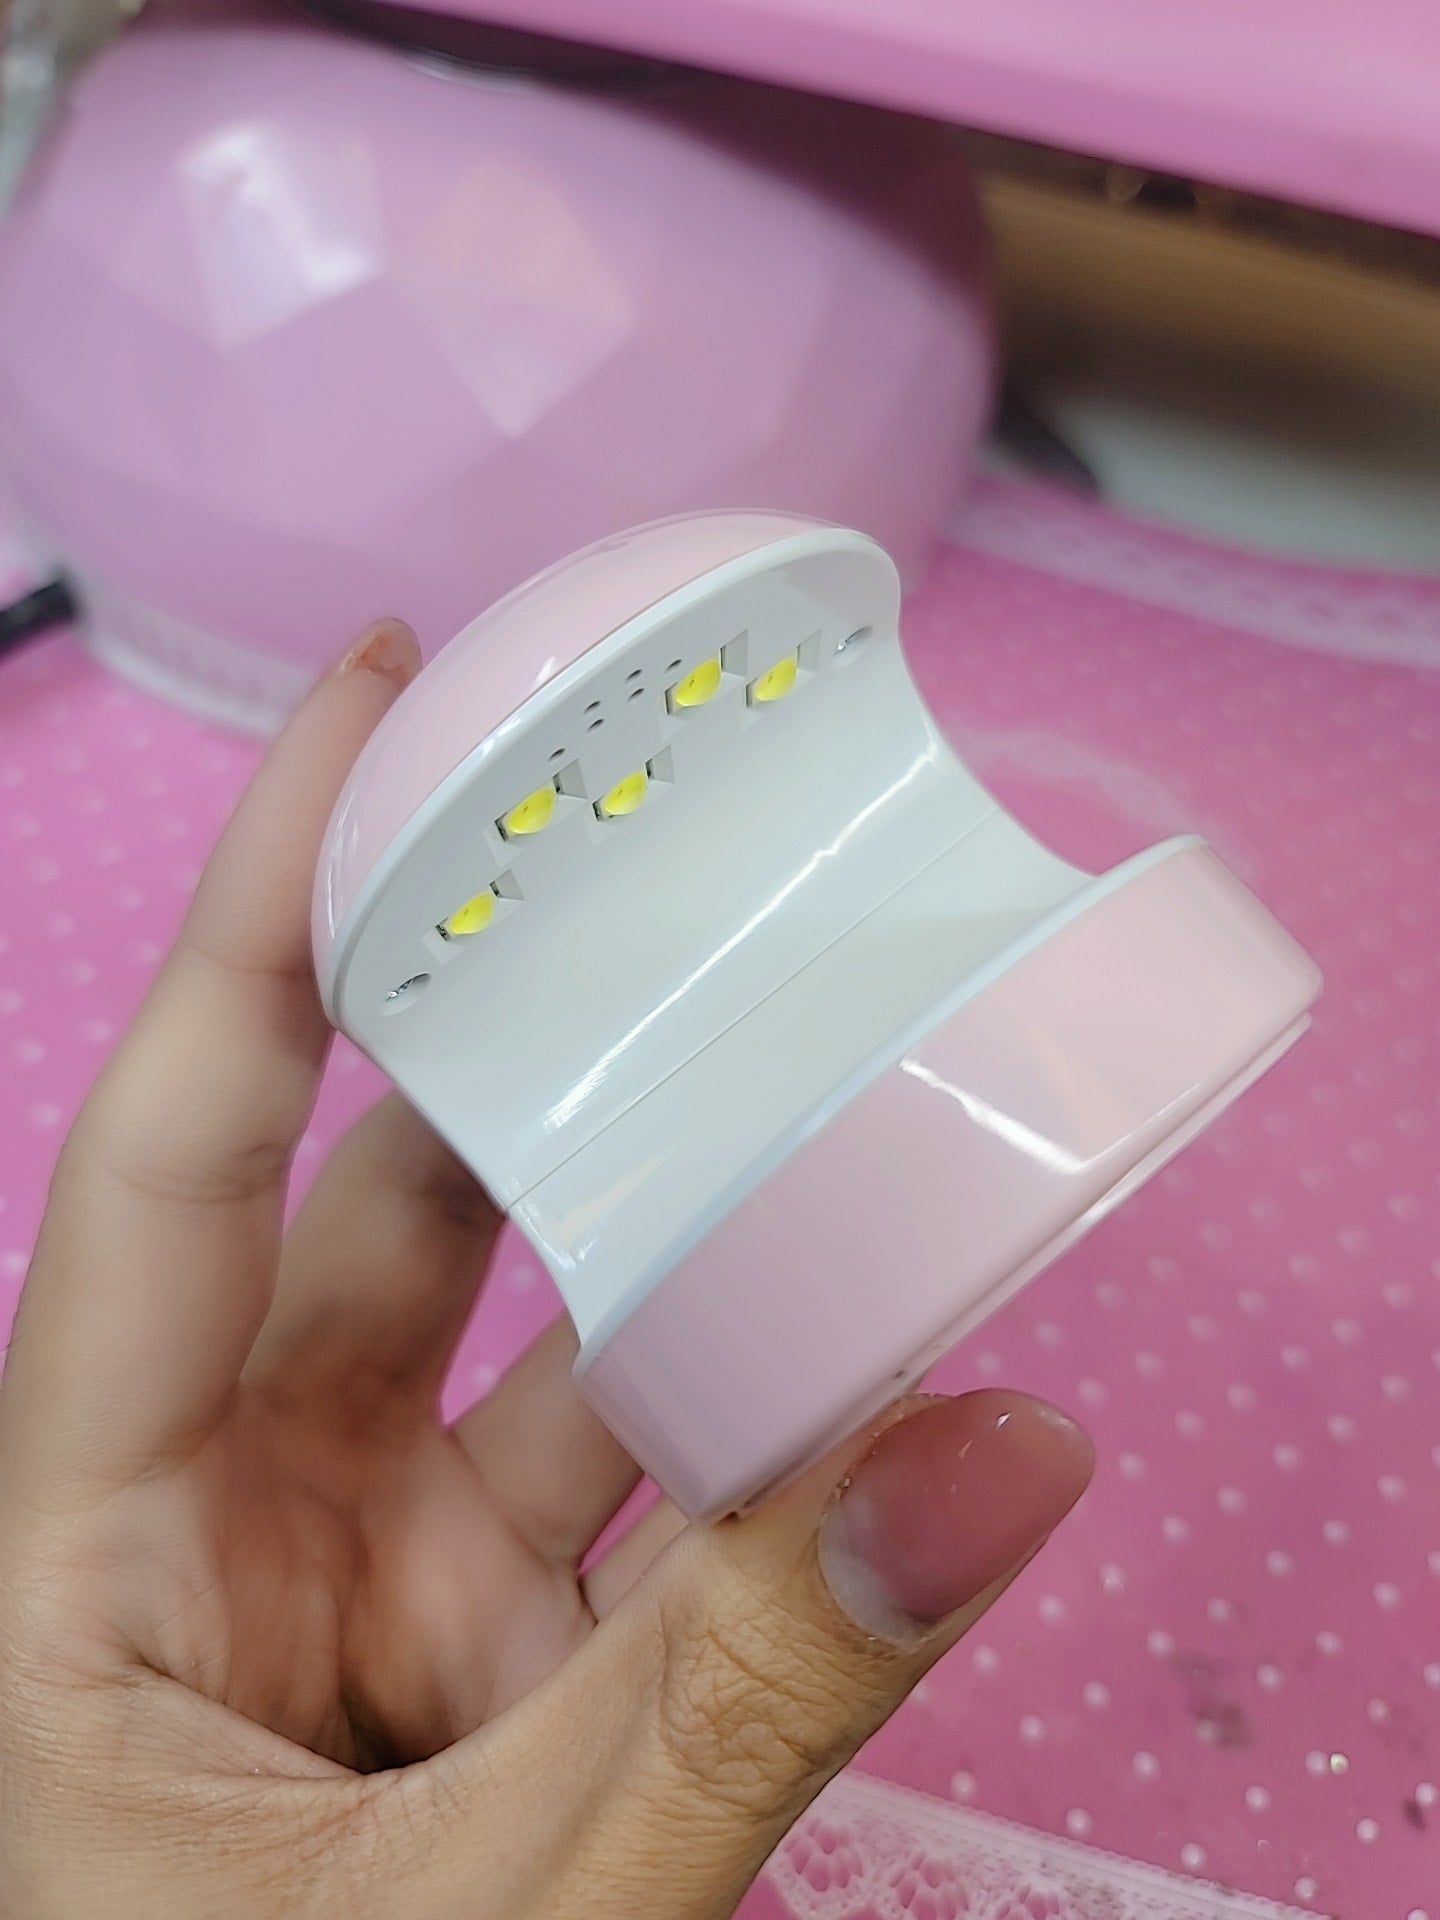 PRO DIY Lamp !~ uv/led flash lamp hands free (Mini LED Nail Lamp,Innovative Gel Nail Lamp for Easy and Fast Nal Extension System,Quicky-Dry Nail Light,Portable USB Mini UV Light for Travel Manicure Home DIY,UV LED )